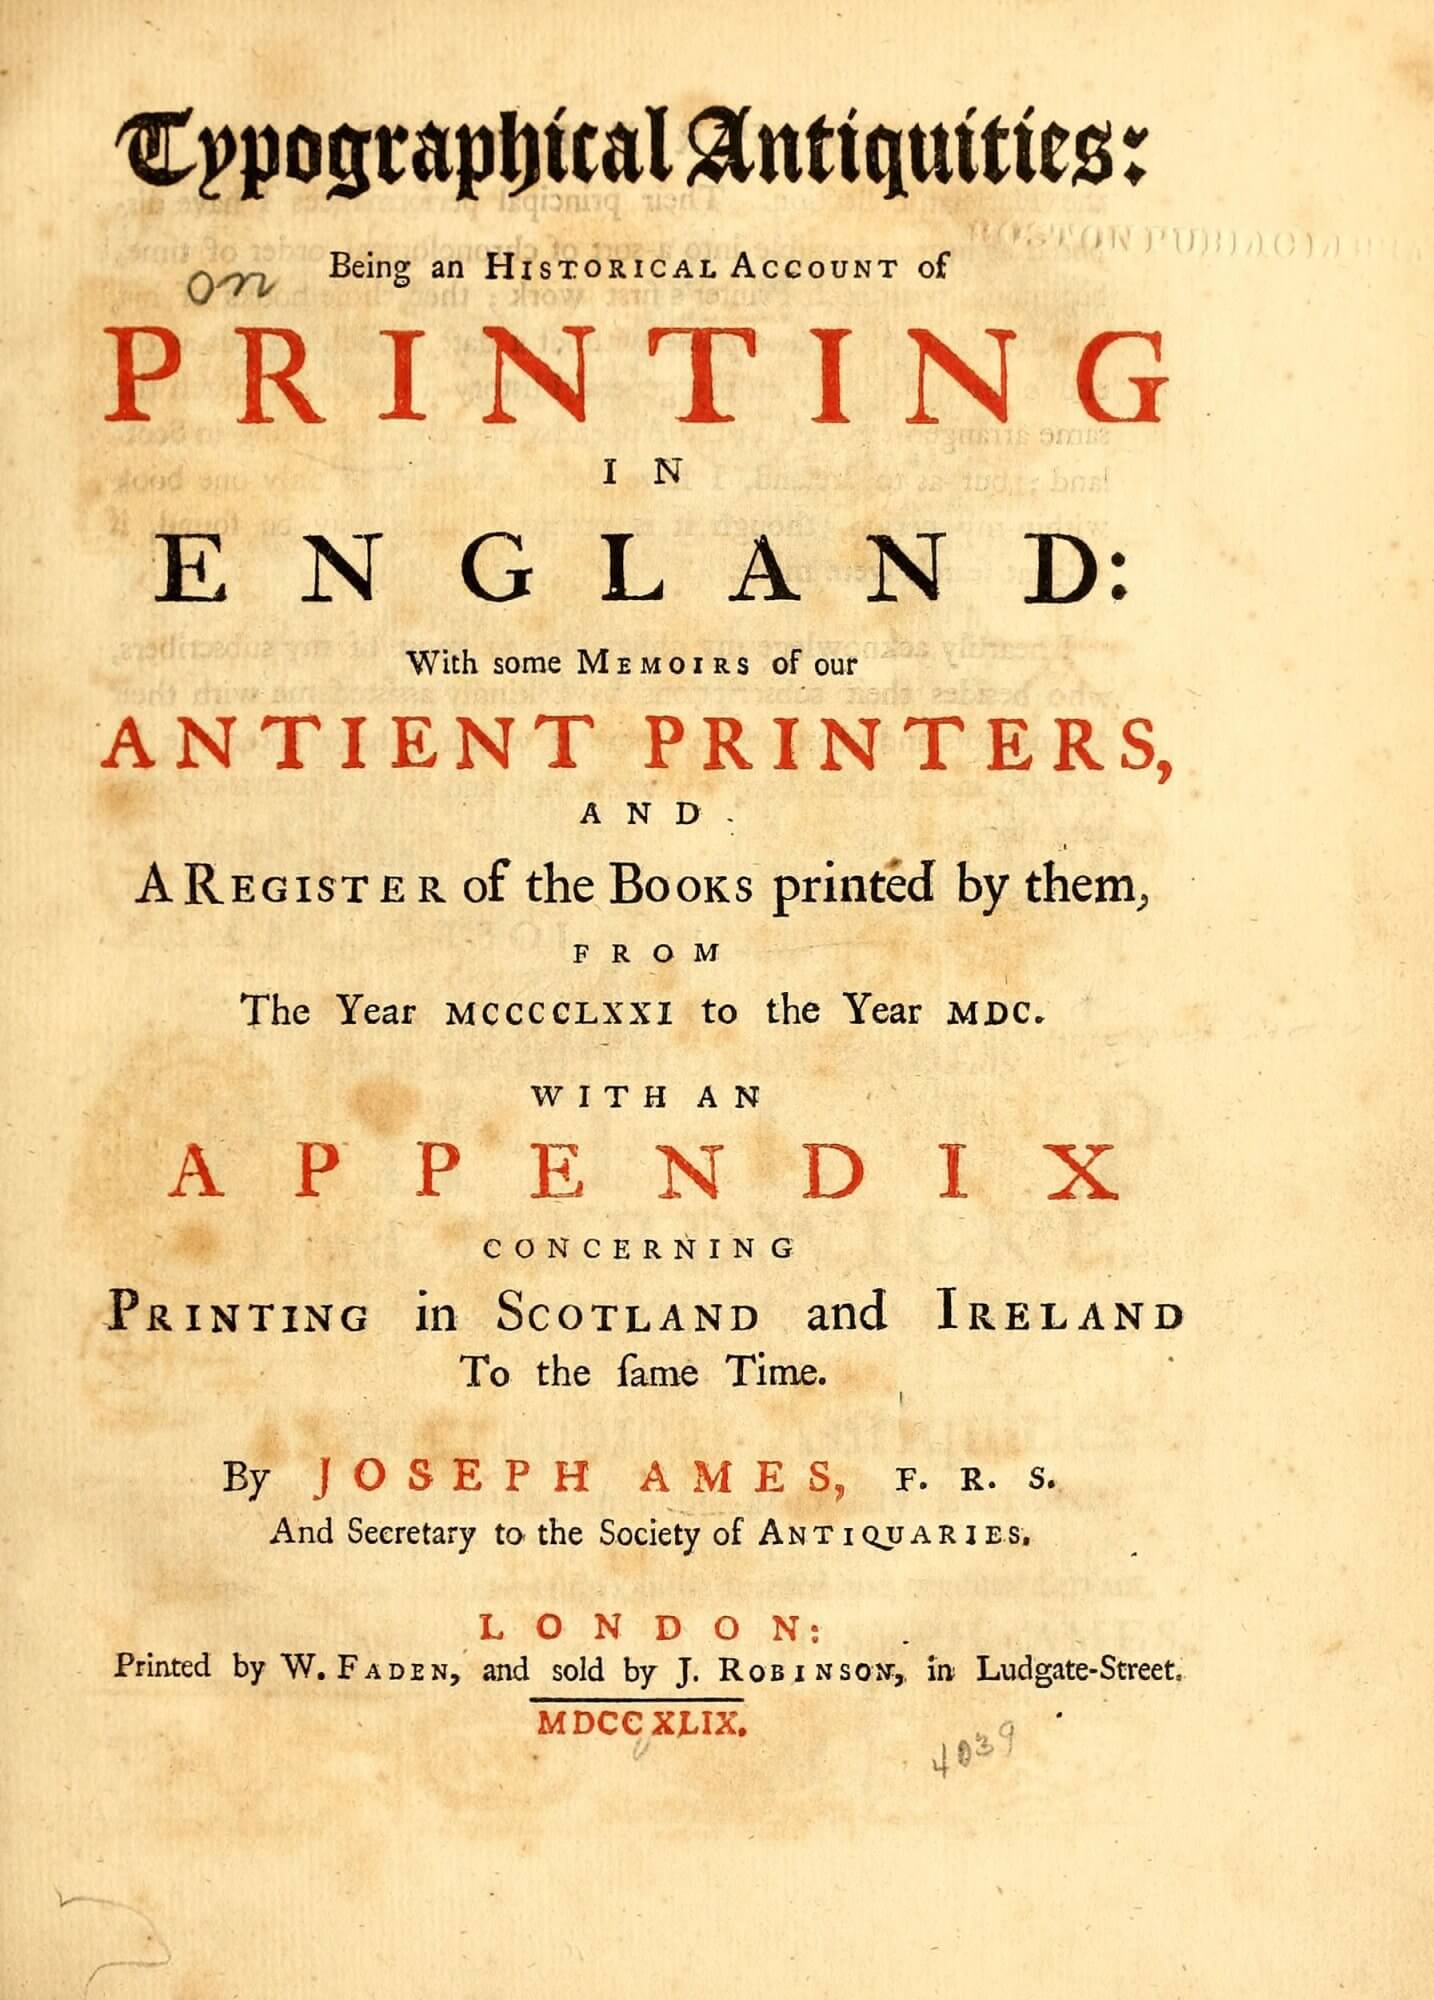 This title page carefully uses a combination of gothic, roman, black, and red letters to evoke the earlier printing that is its subject while still looking enticingly contemporary.